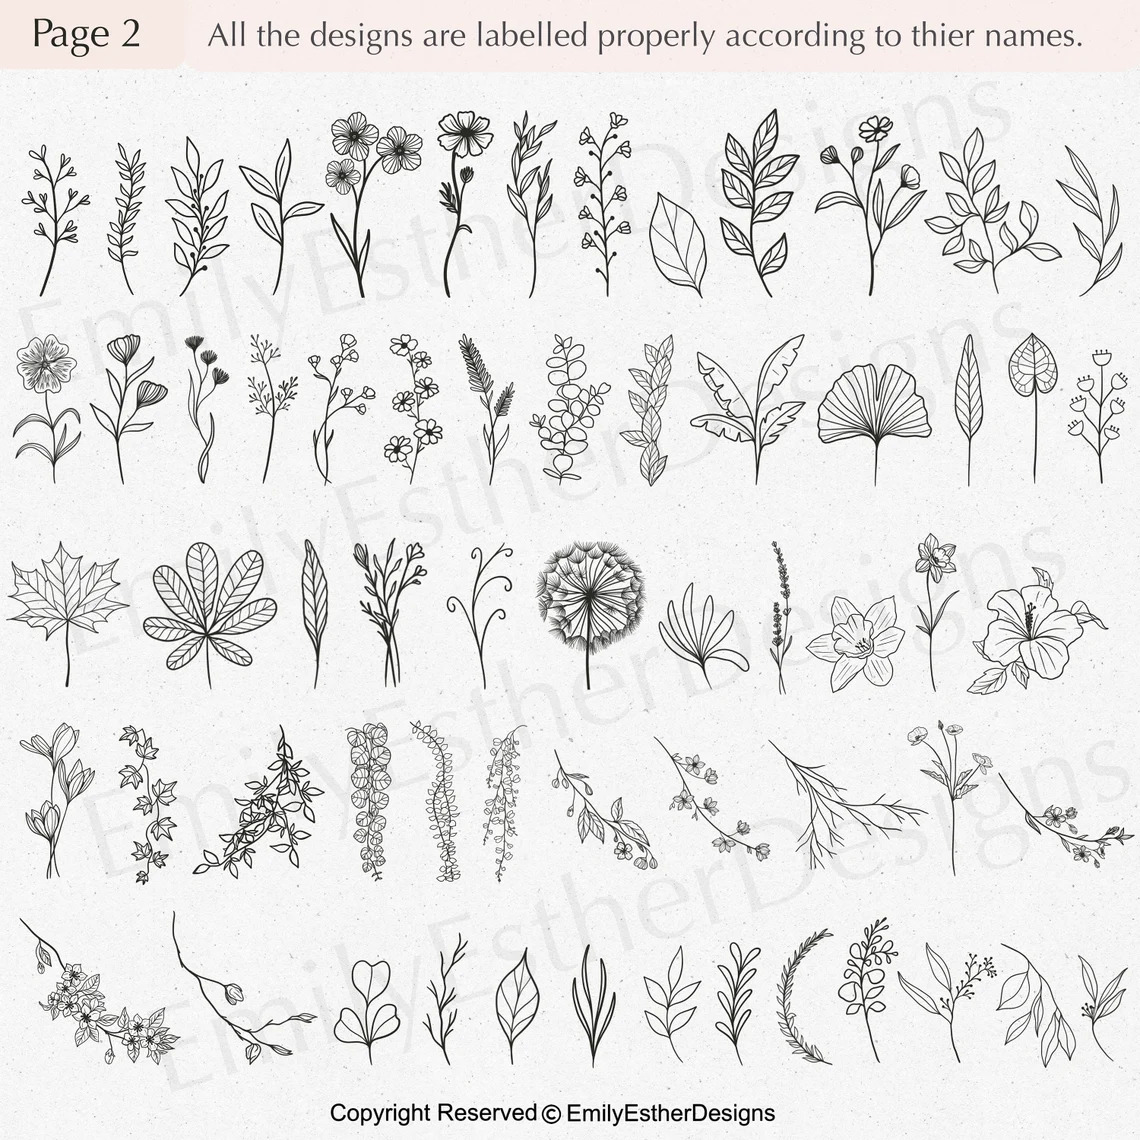 Suggested plants for your prints.